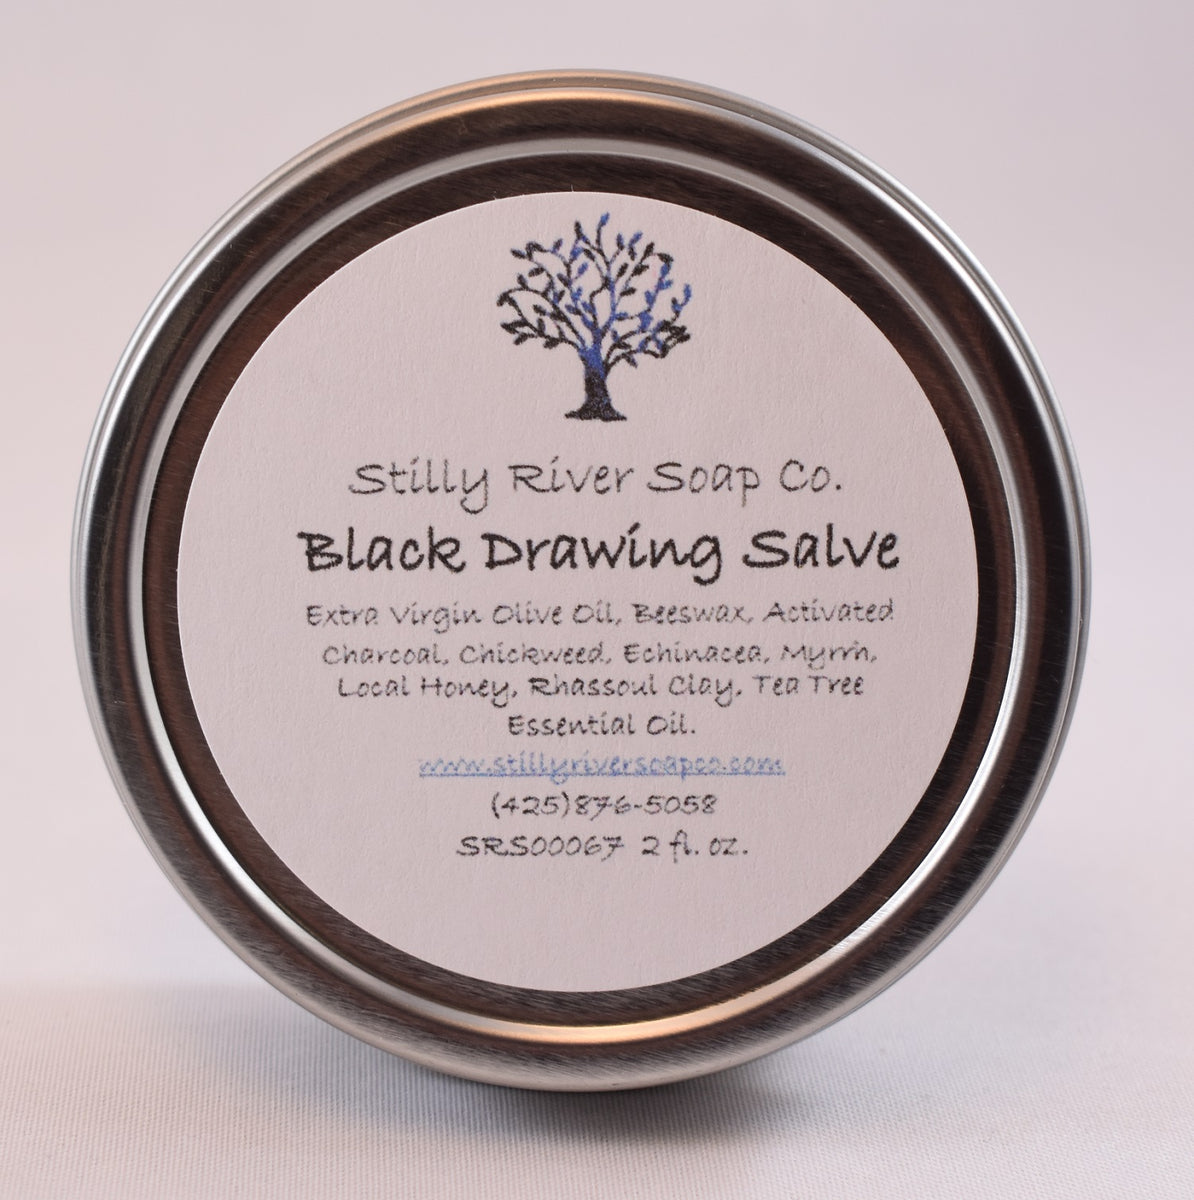 Black Drawing / Charcoal Salve – Stilly River Soap Co. Natural Products